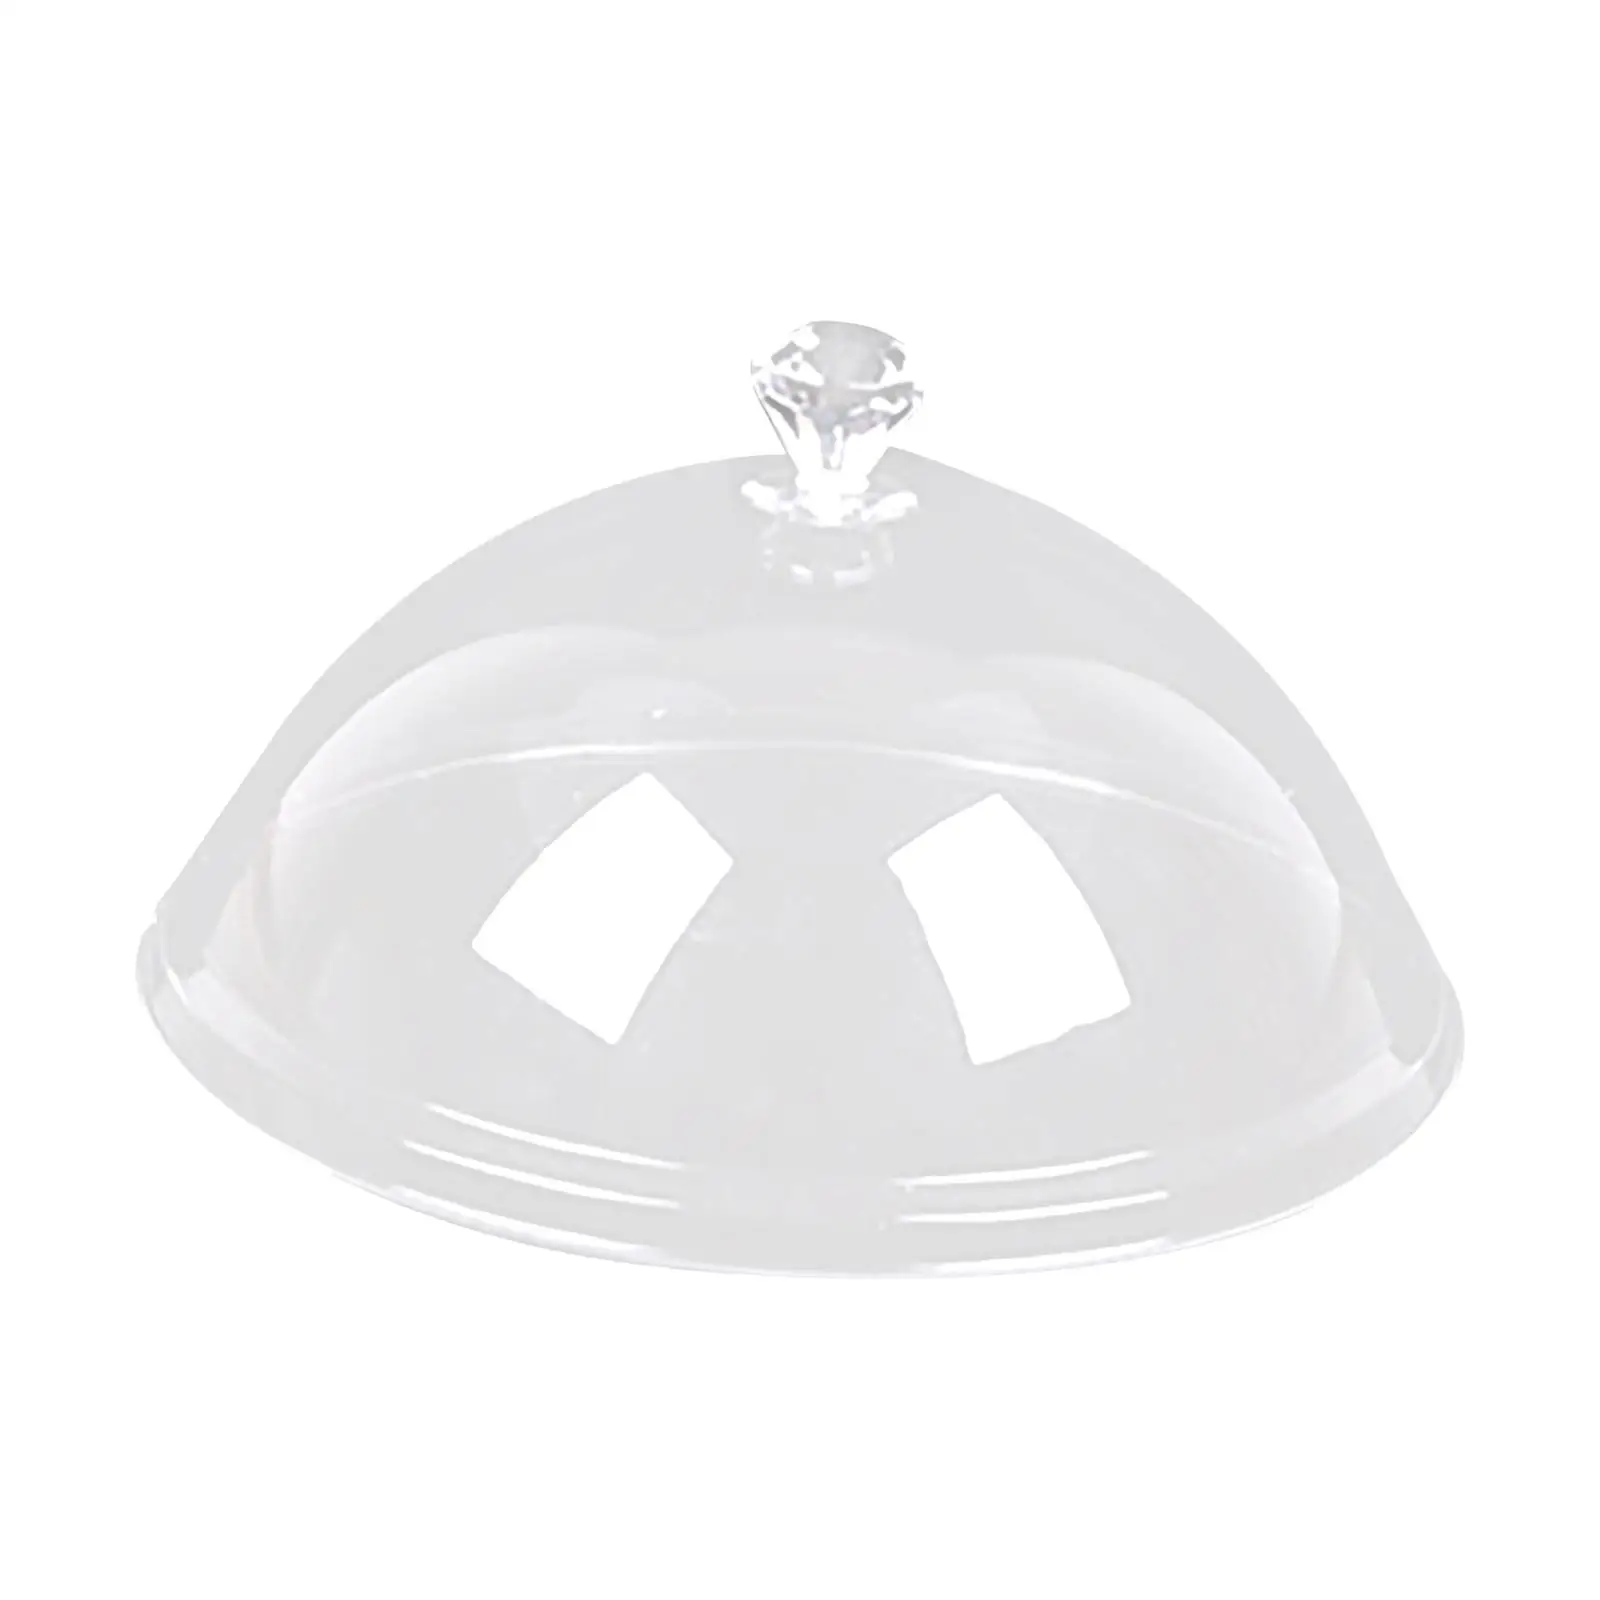 Plastic Dust Cover  Round Rotating Cake Stand Cake Pan for Kitchen